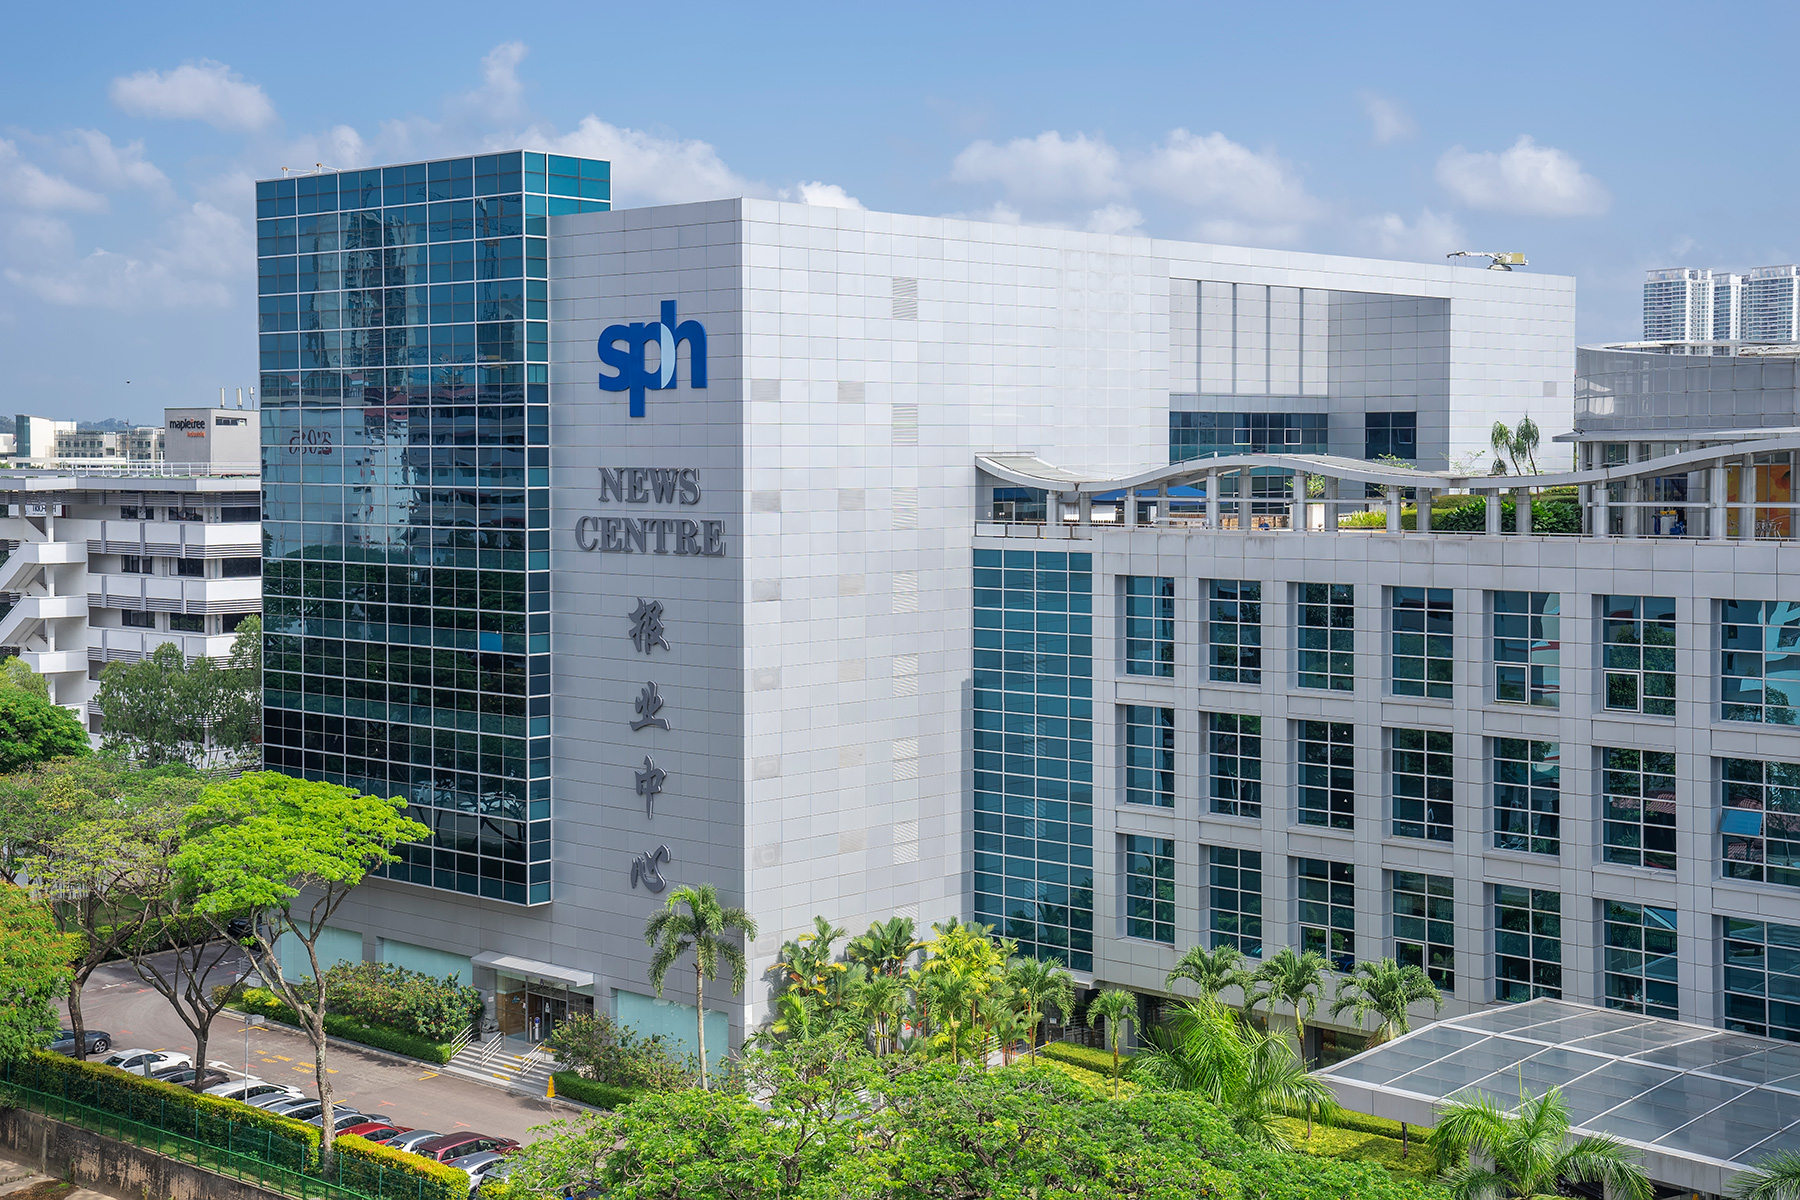 SPH News Center building – a modern concrete building with a glass edifice.